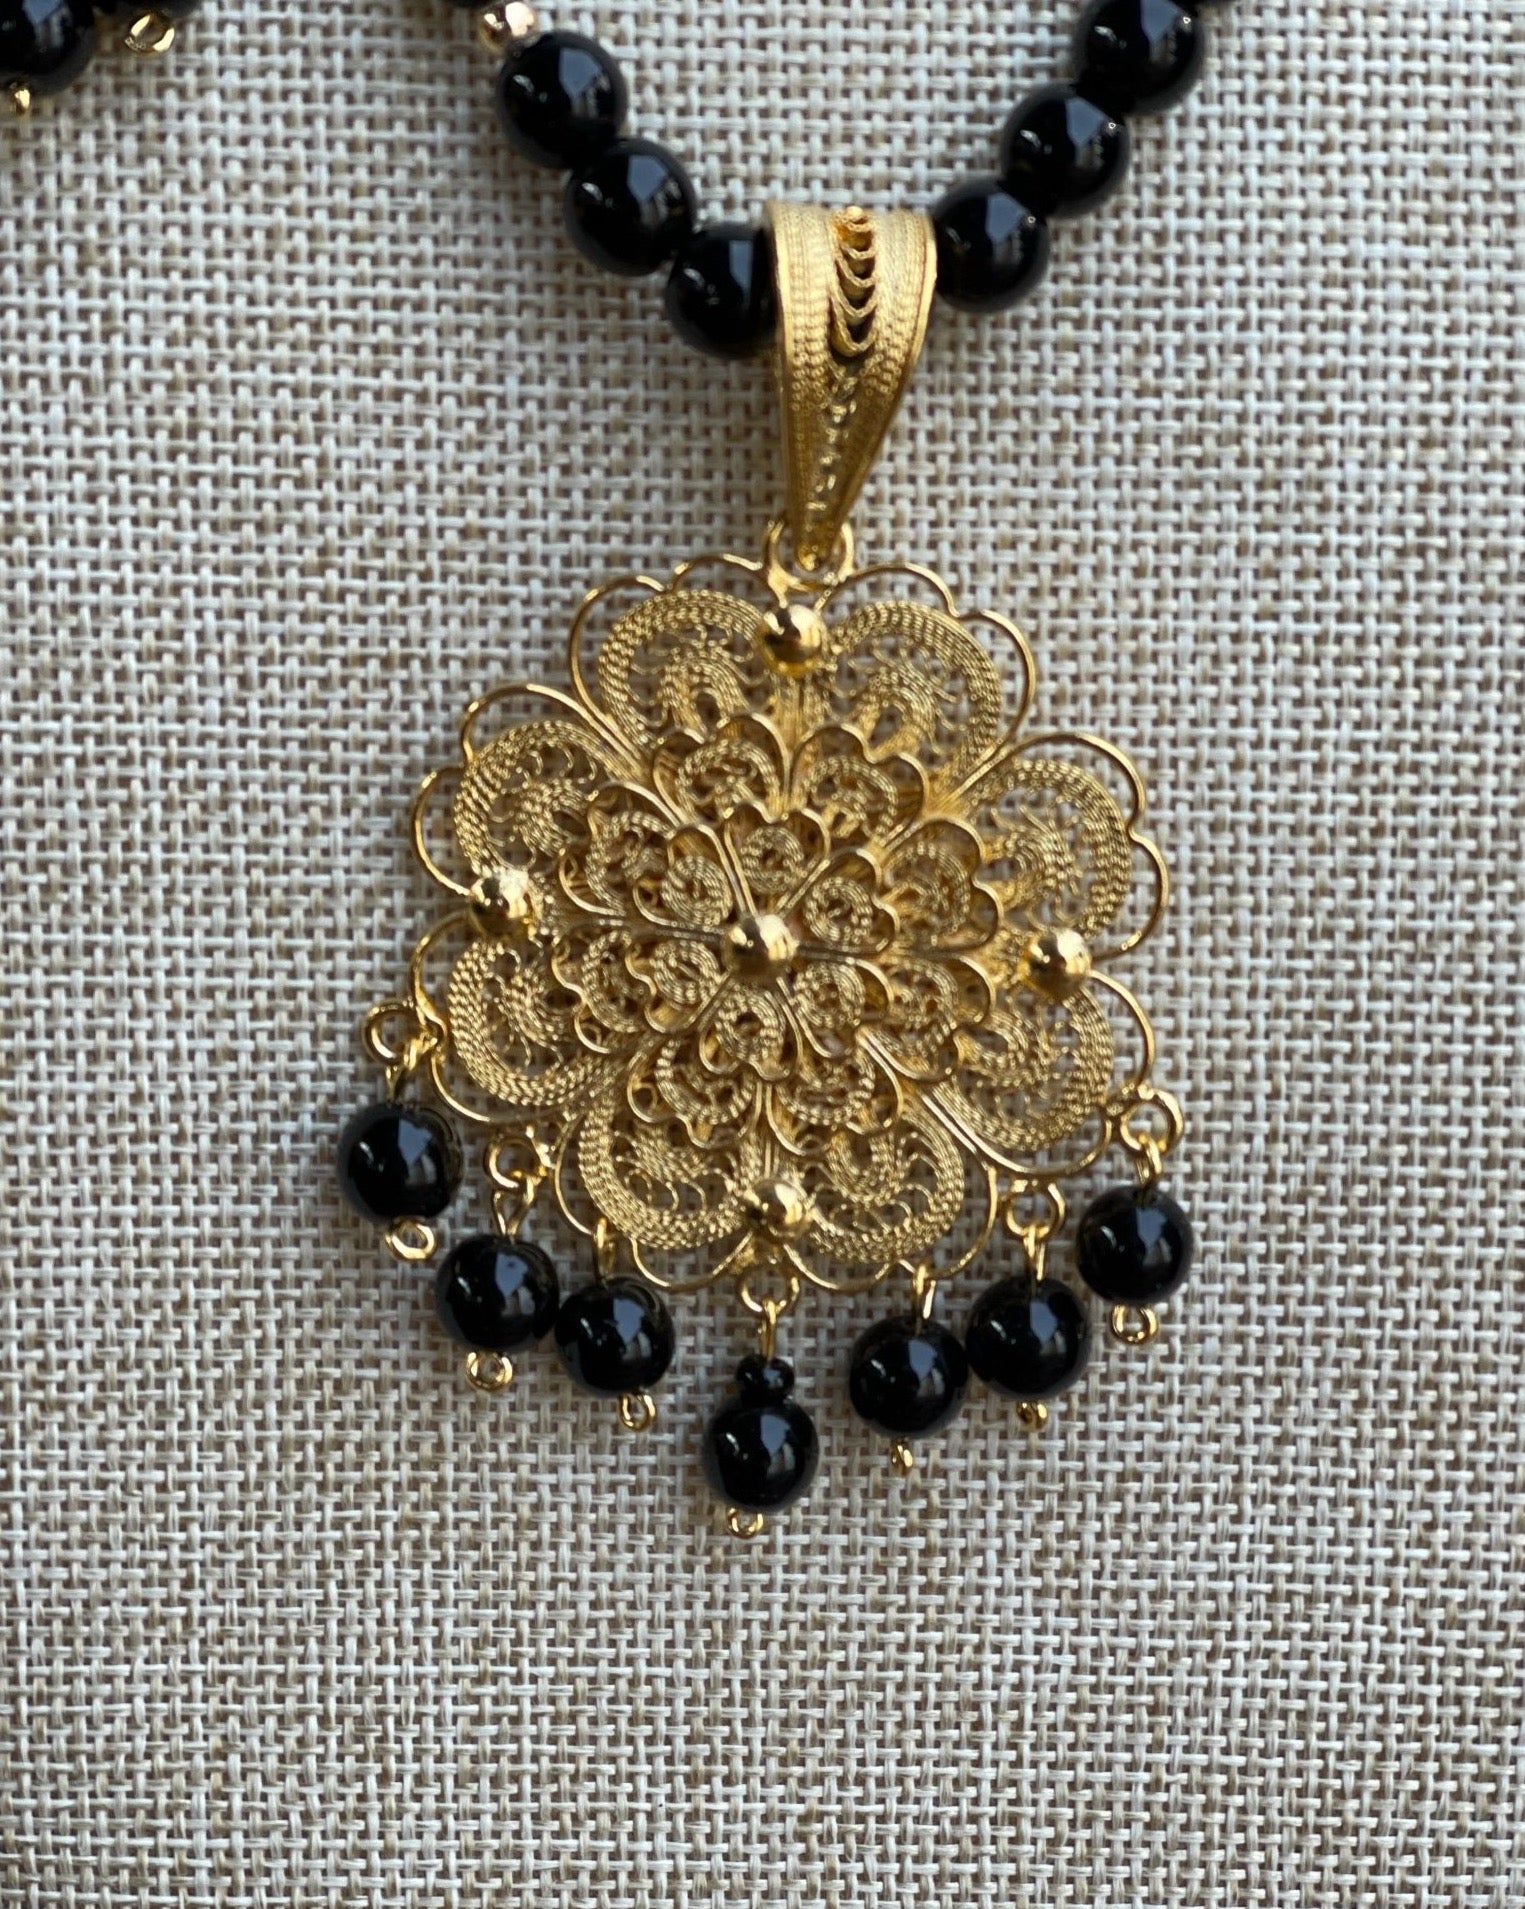 Mexican Filigree Earrings and Necklace. Stone Bead Necklace. Elegant Choker Necklace. Margarita Doble Negra - Solei Store